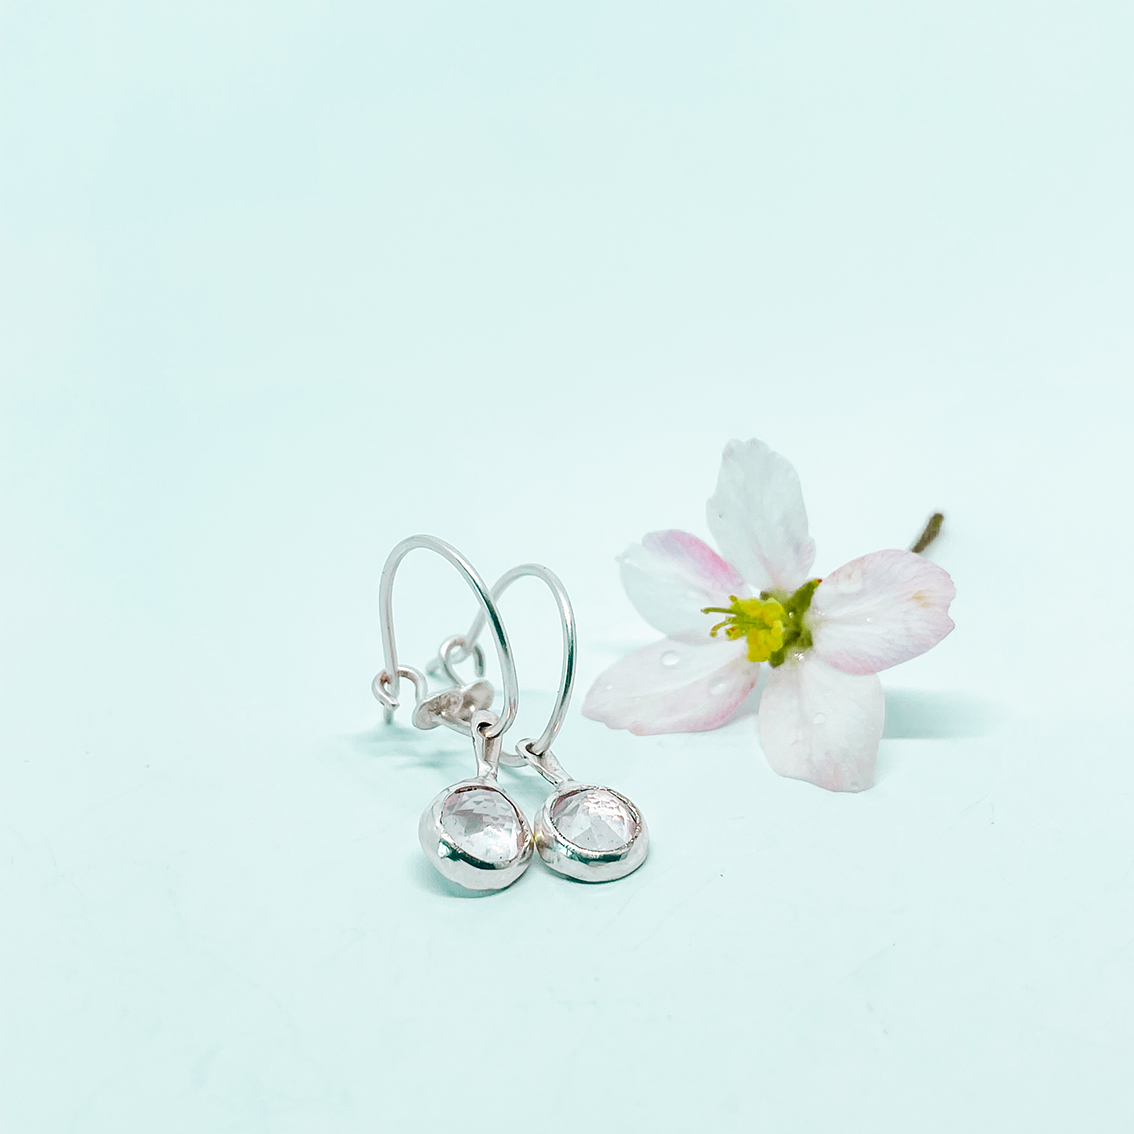 Hoop Earrings with Charms | Celestial Charms | Sterling + Rose Quartz